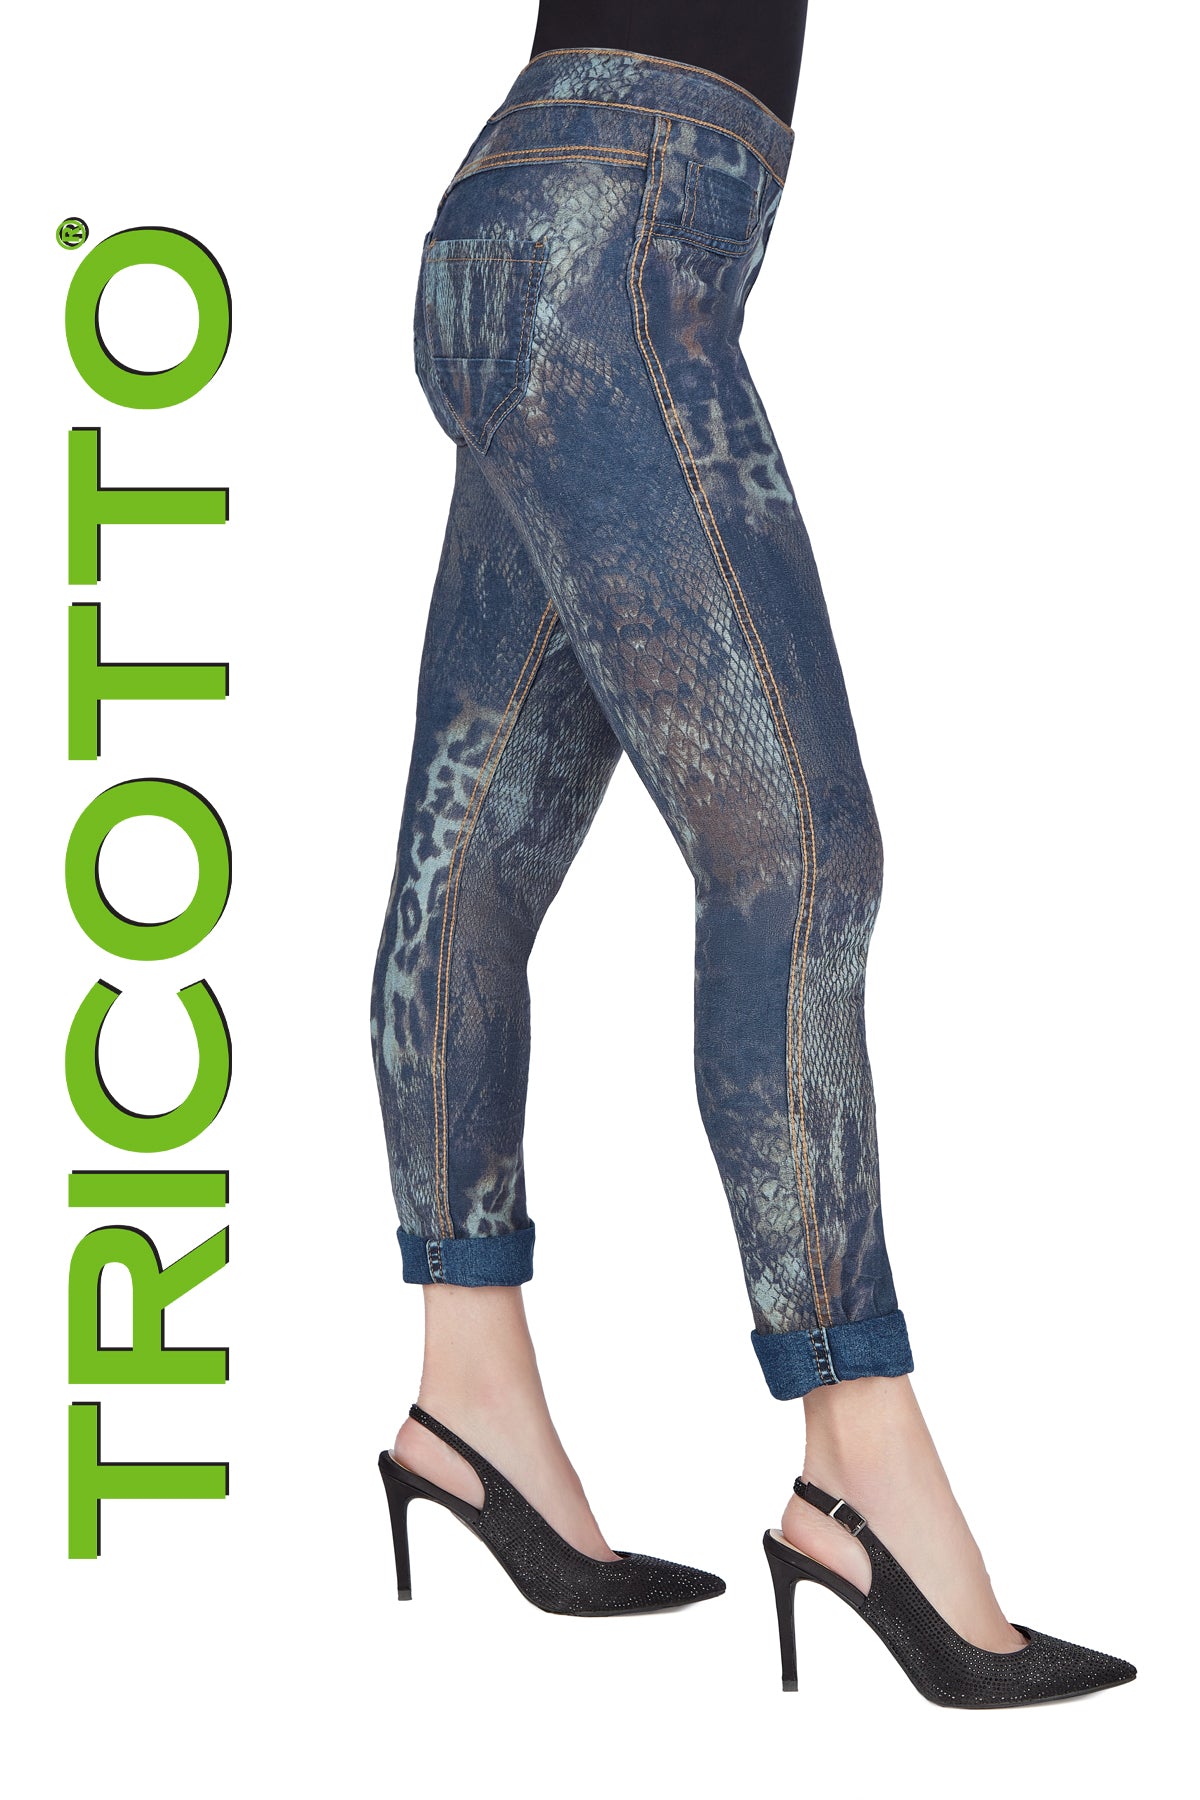 Tricotto Jeans-Tricotto Pants-Buy Tricotto Jeans Online-Tricotto Clothing Montreal-Tricotto Online Shop-Women's Jeans Online